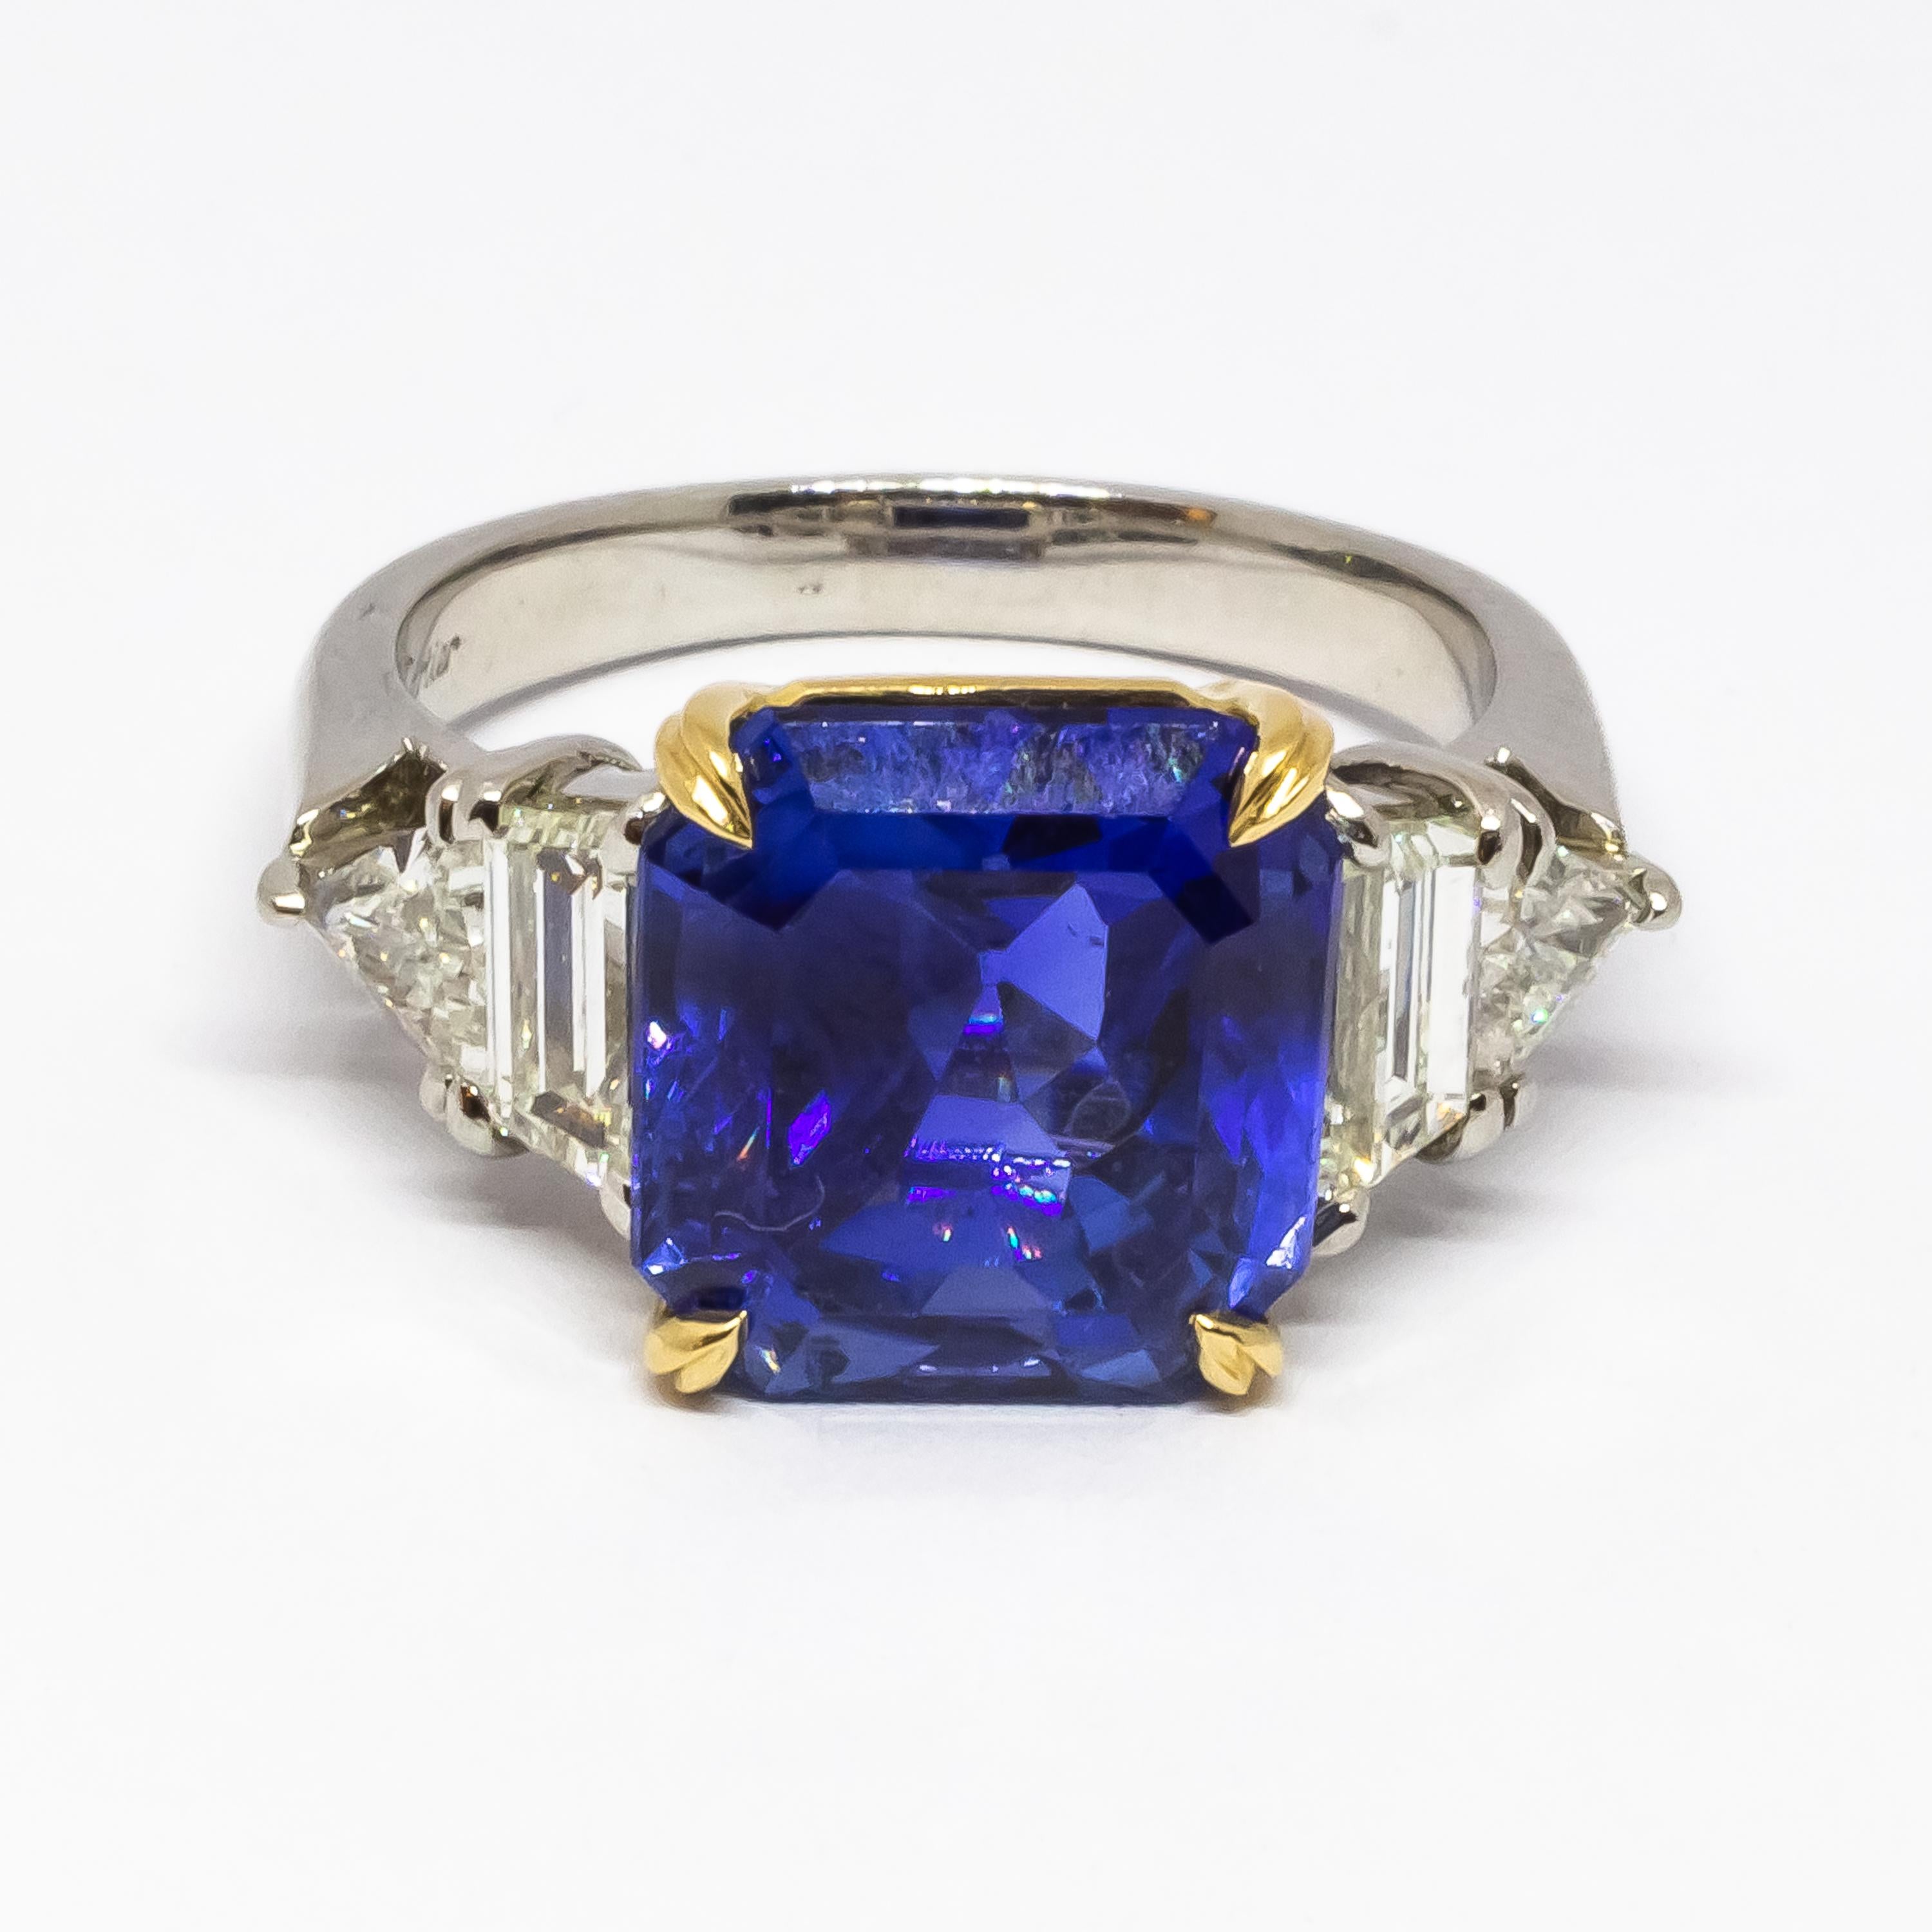 Cartier 7.51 Carat GIA Certified Burma Sapphire, Diamond, Gold and Platinum Ring In Excellent Condition For Sale In London, GB